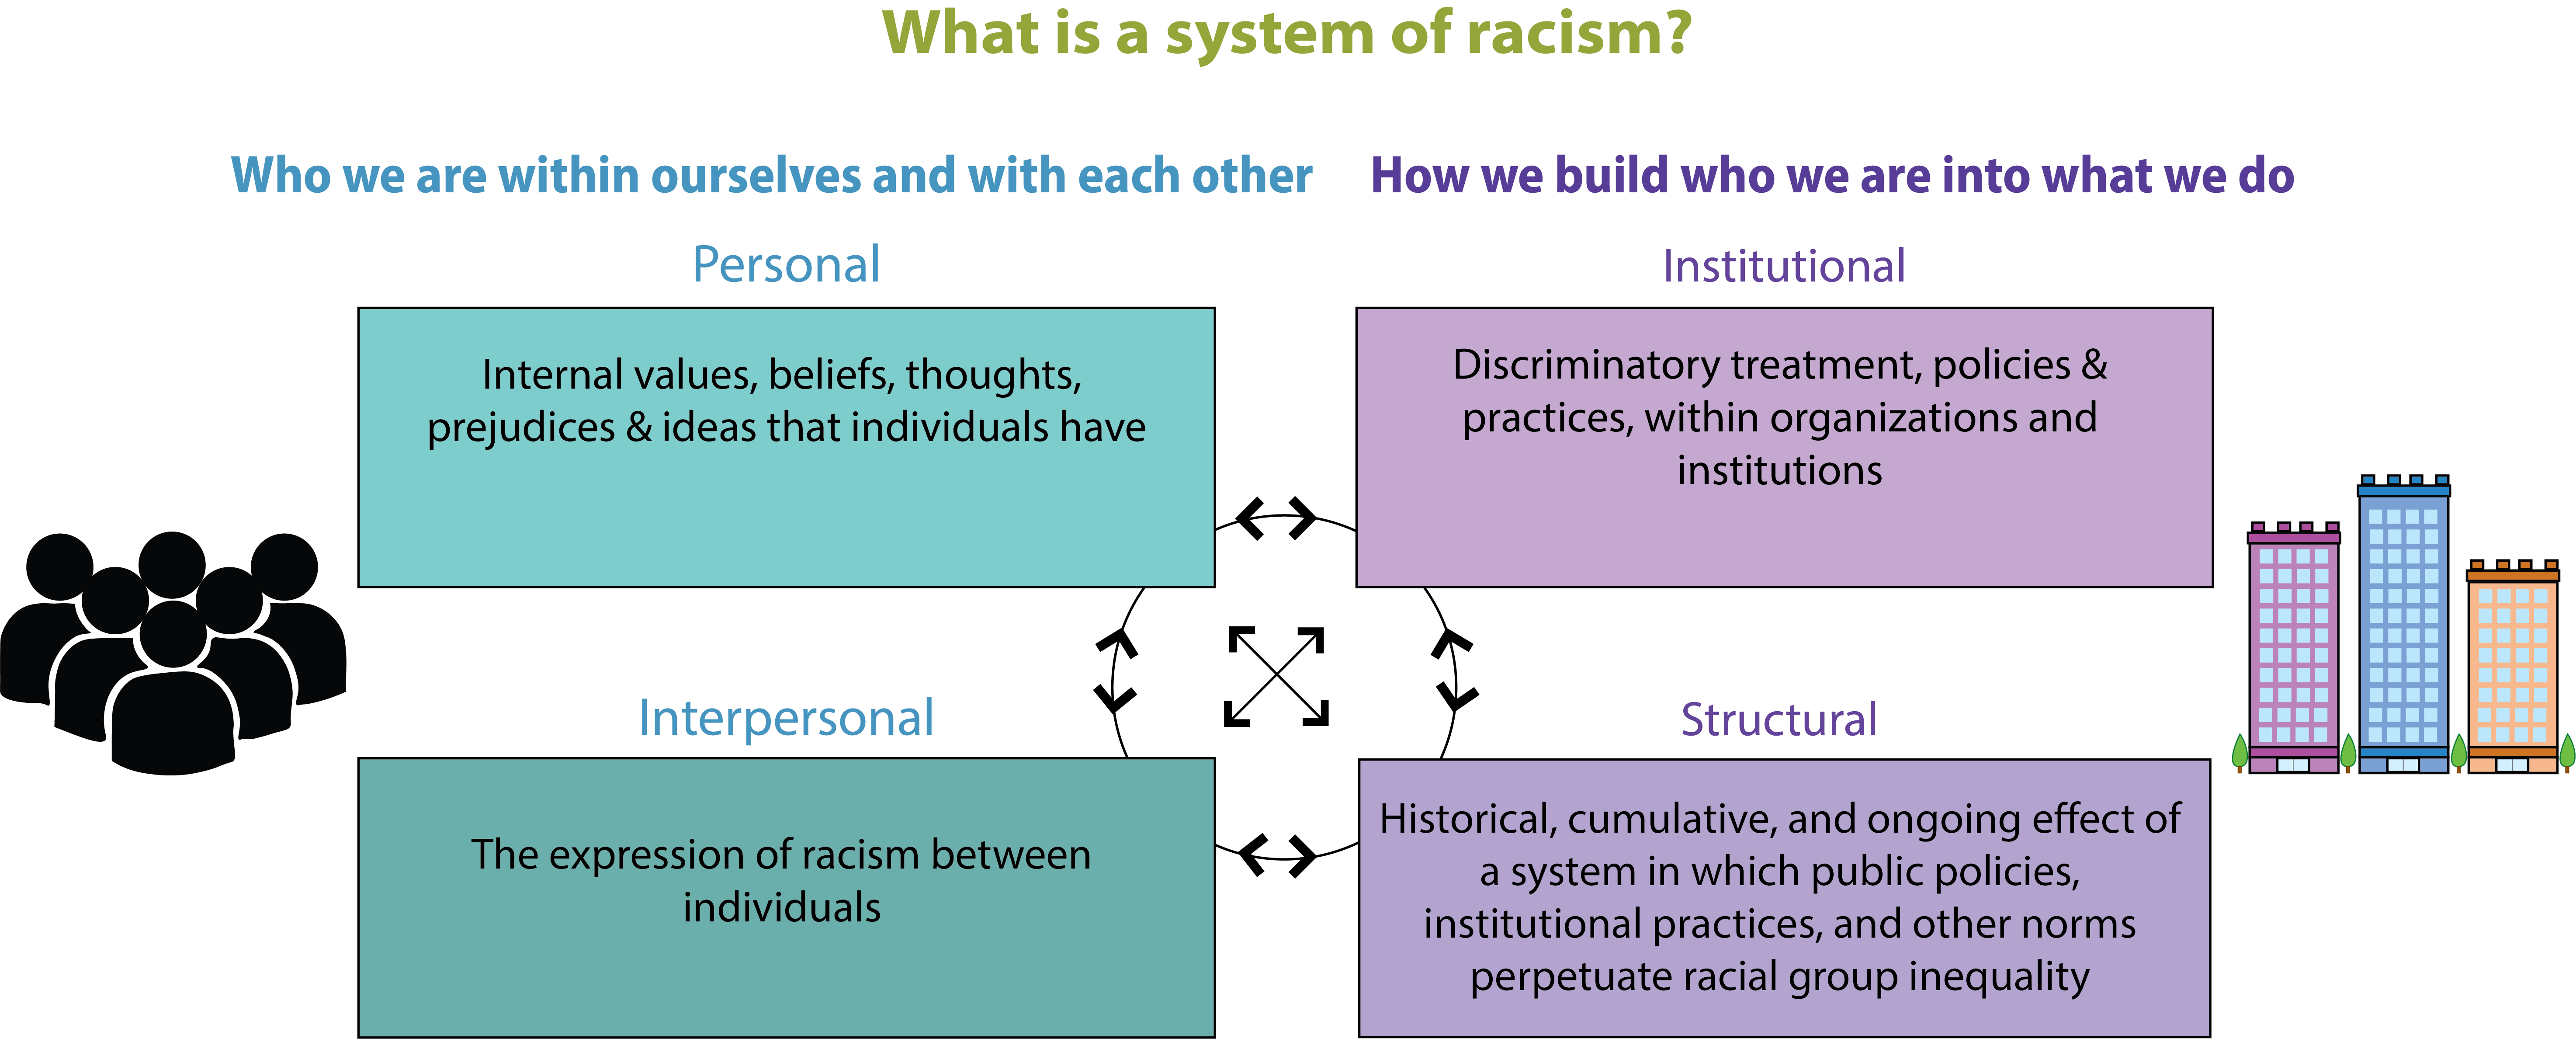 What is a system or racism?